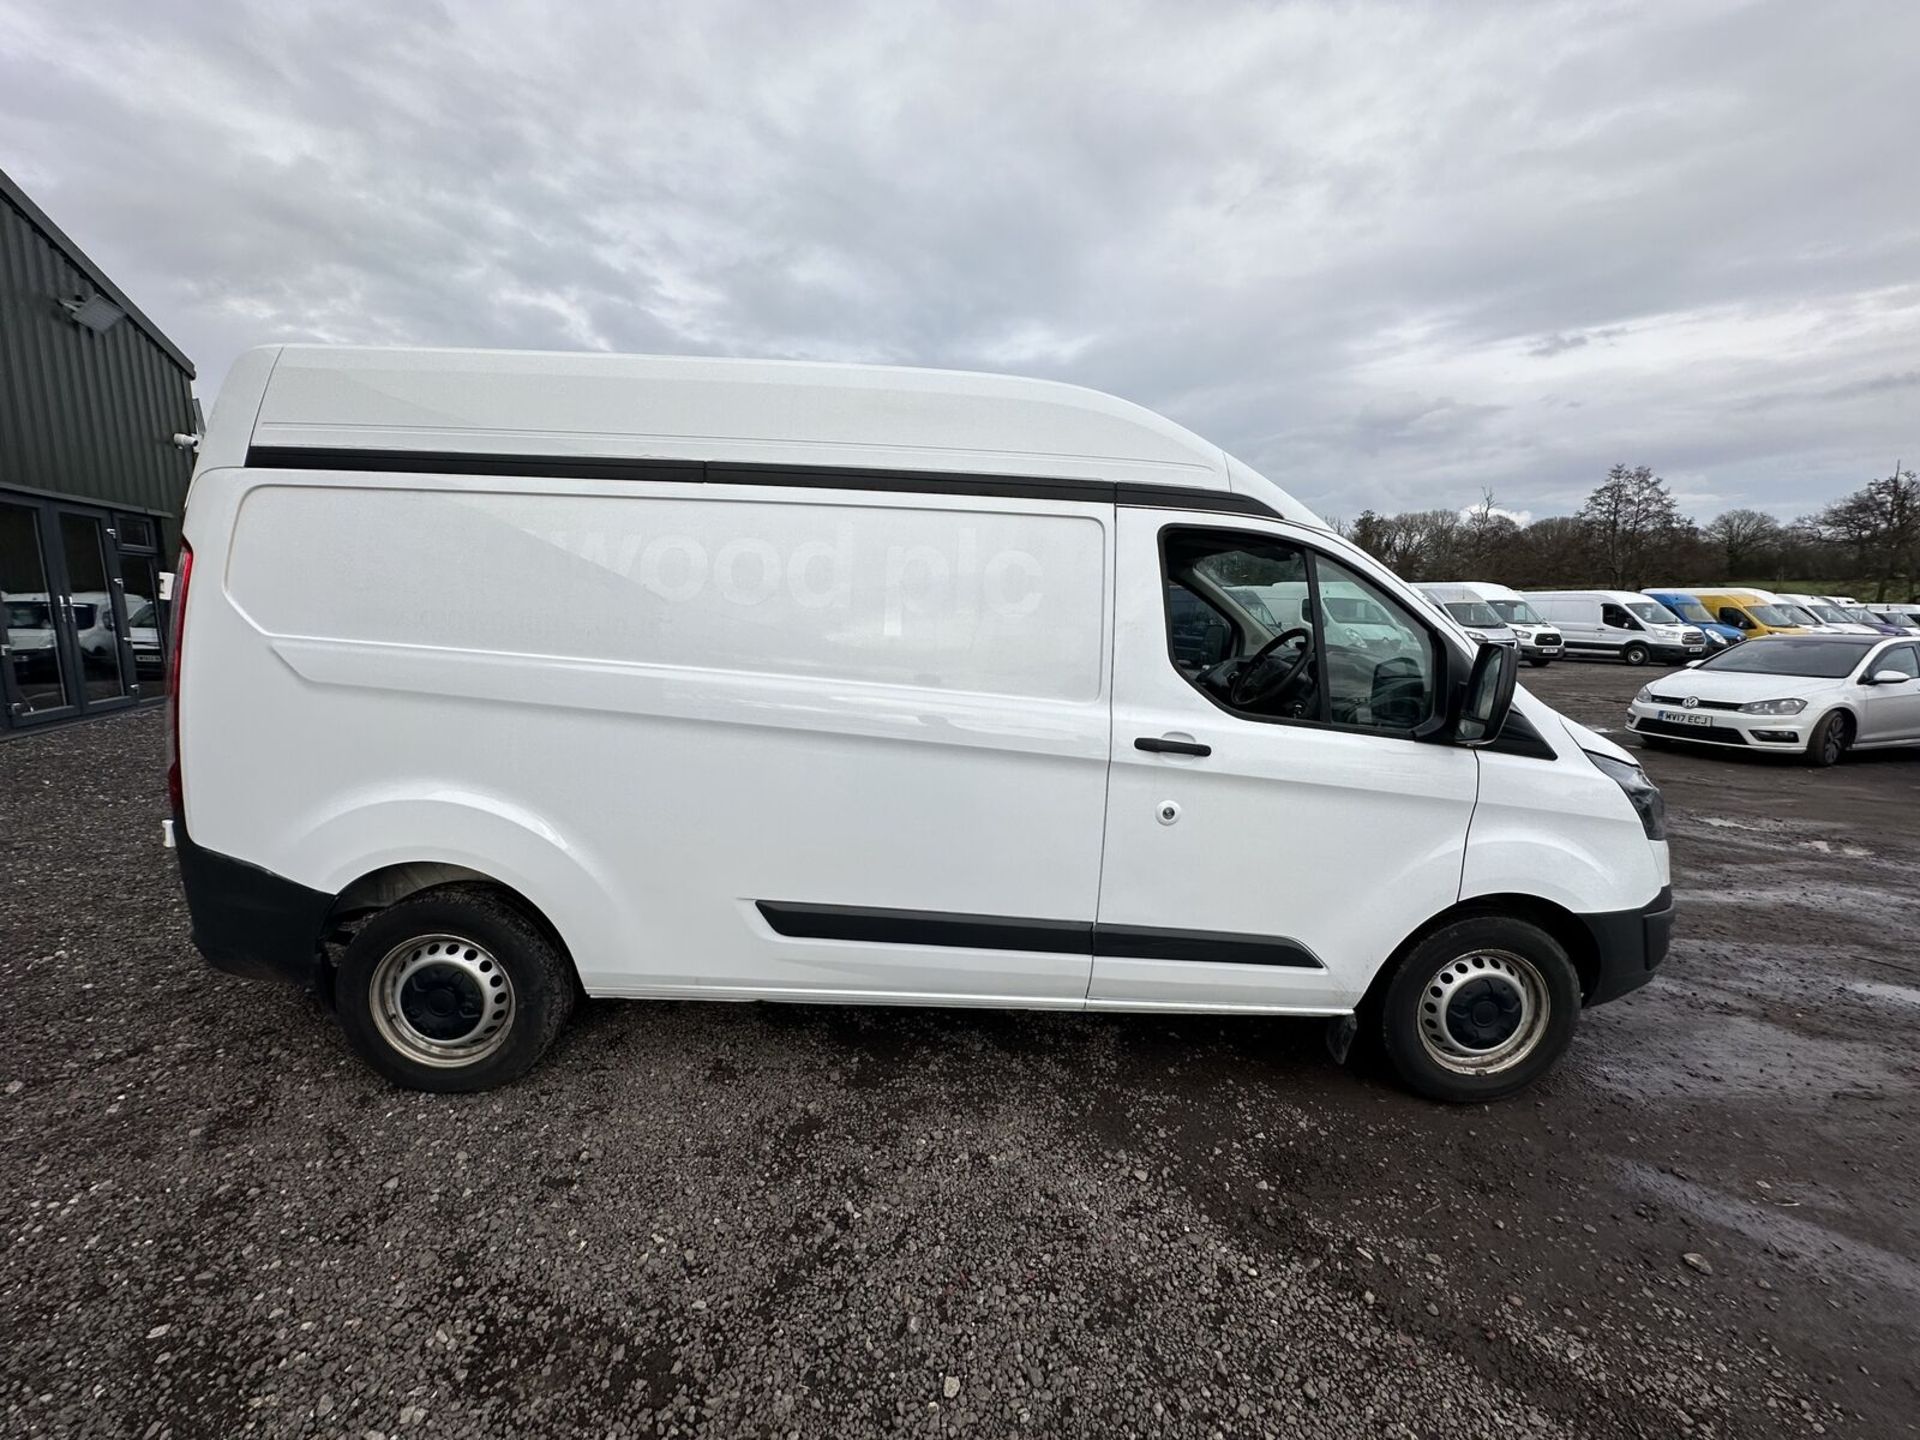 67 PLATE FORD TRANSIT CUSTOM: HIGH ROOF, EURO 6 ULEZ, READY FOR WORK!